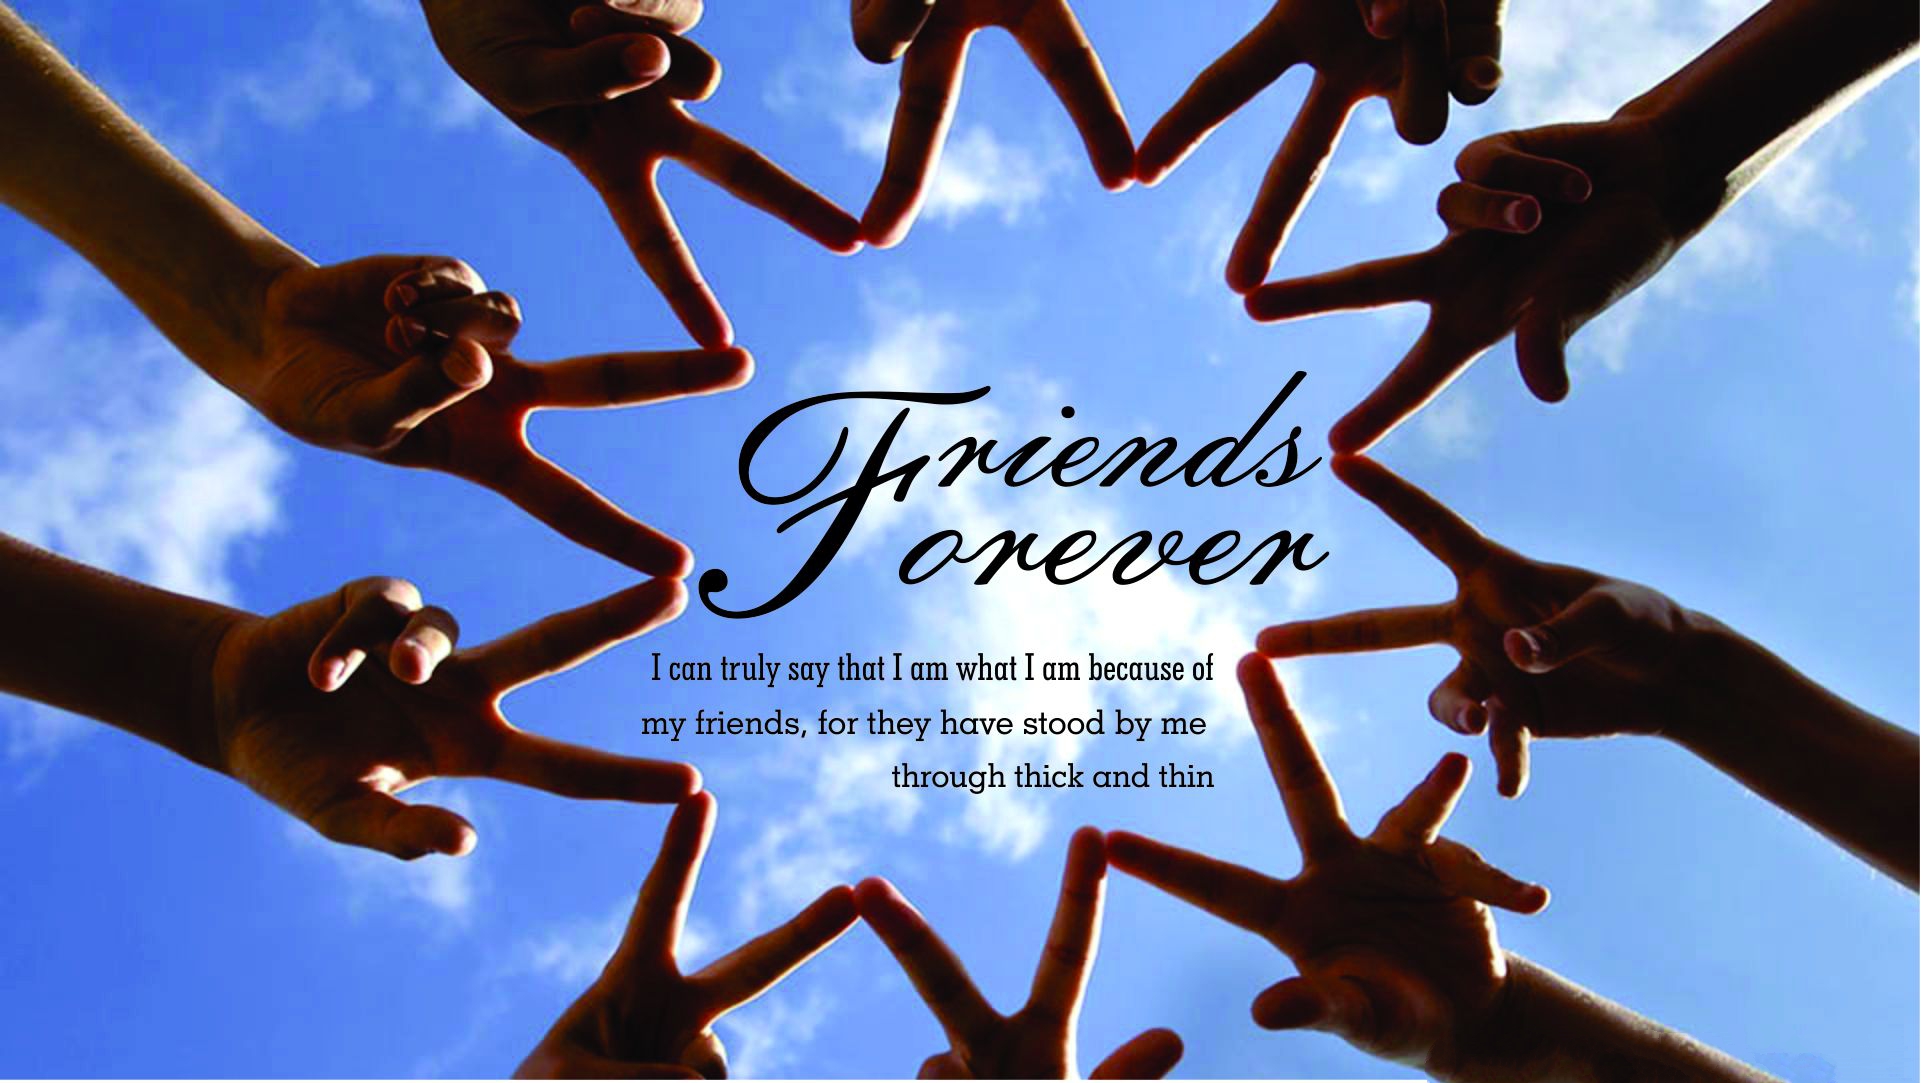 Best Friends Forever Backgrounds Hd Friends Forever Hd Images Download 6926 Hd Wallpaper Backgrounds Download